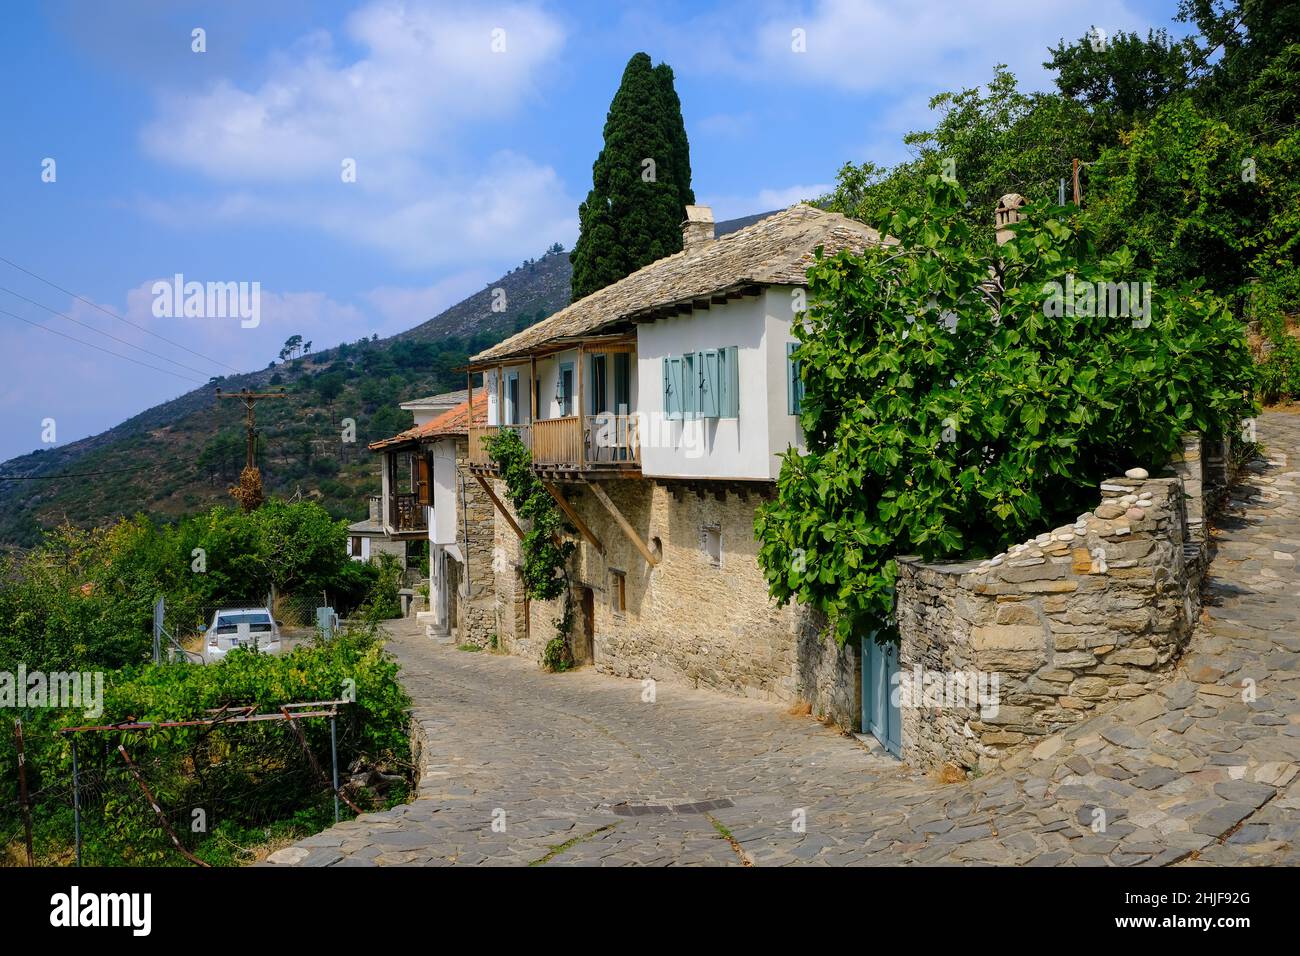 Megalo Kazaviti, Thassos, Greece - The mountain village of Kazaviti with its traditional houses is a popular destination among vacationers. Thassos be Stock Photo